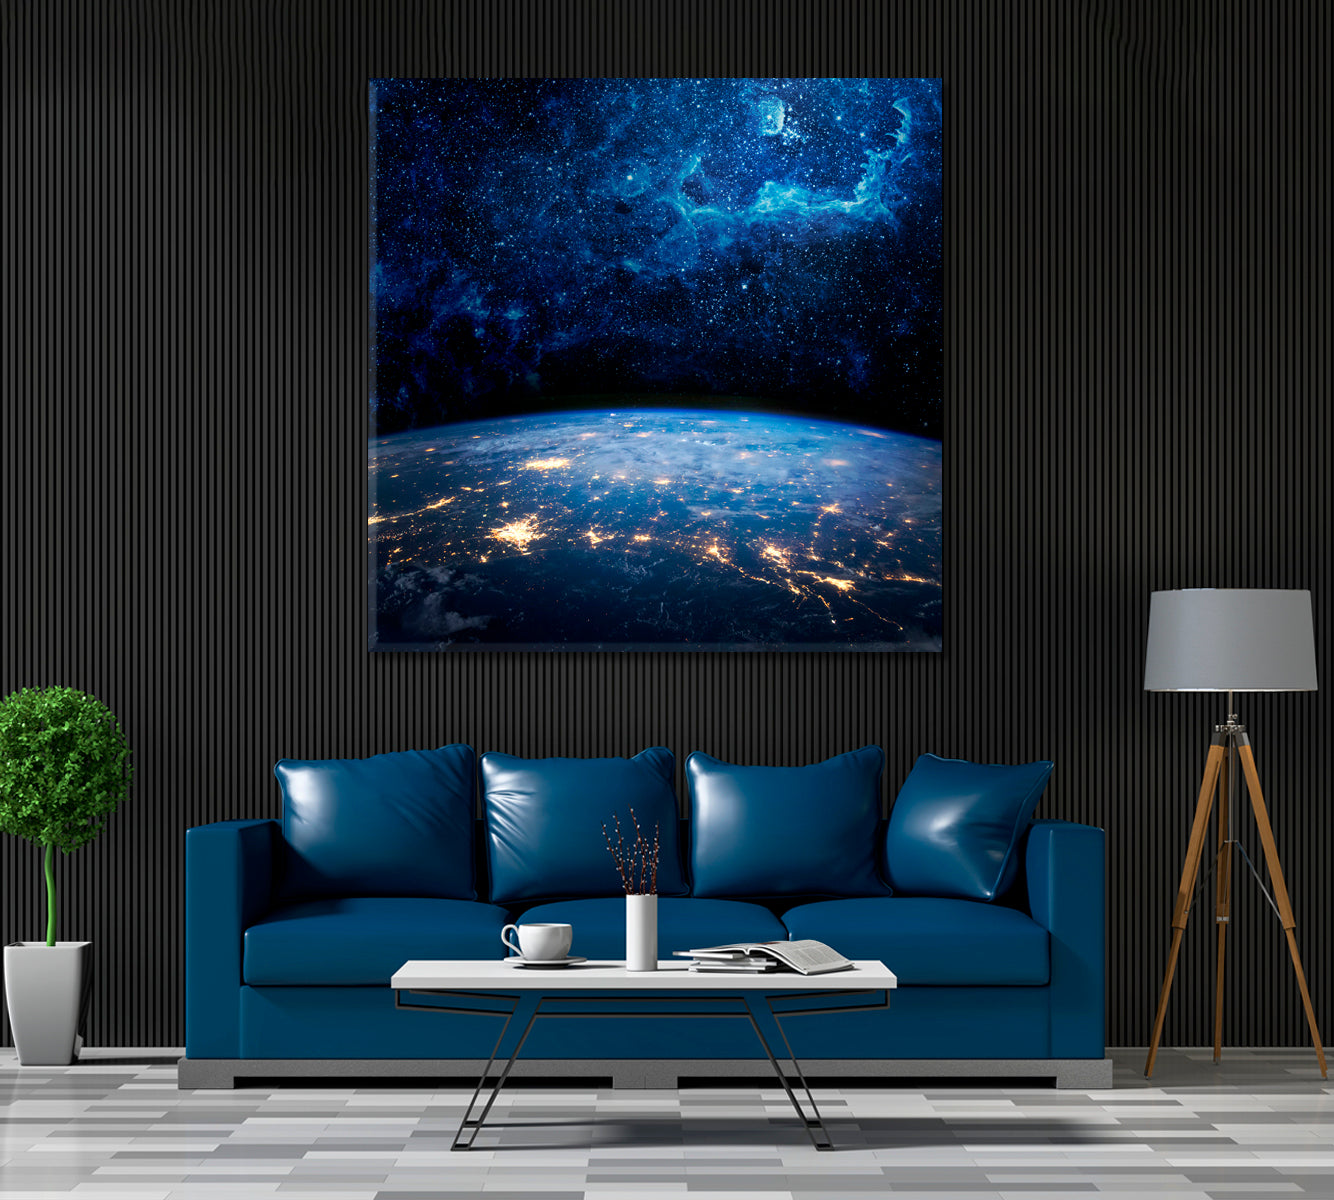 Earth and Galaxy Canvas Print ArtLexy 1 Panel 12"x12" inches 